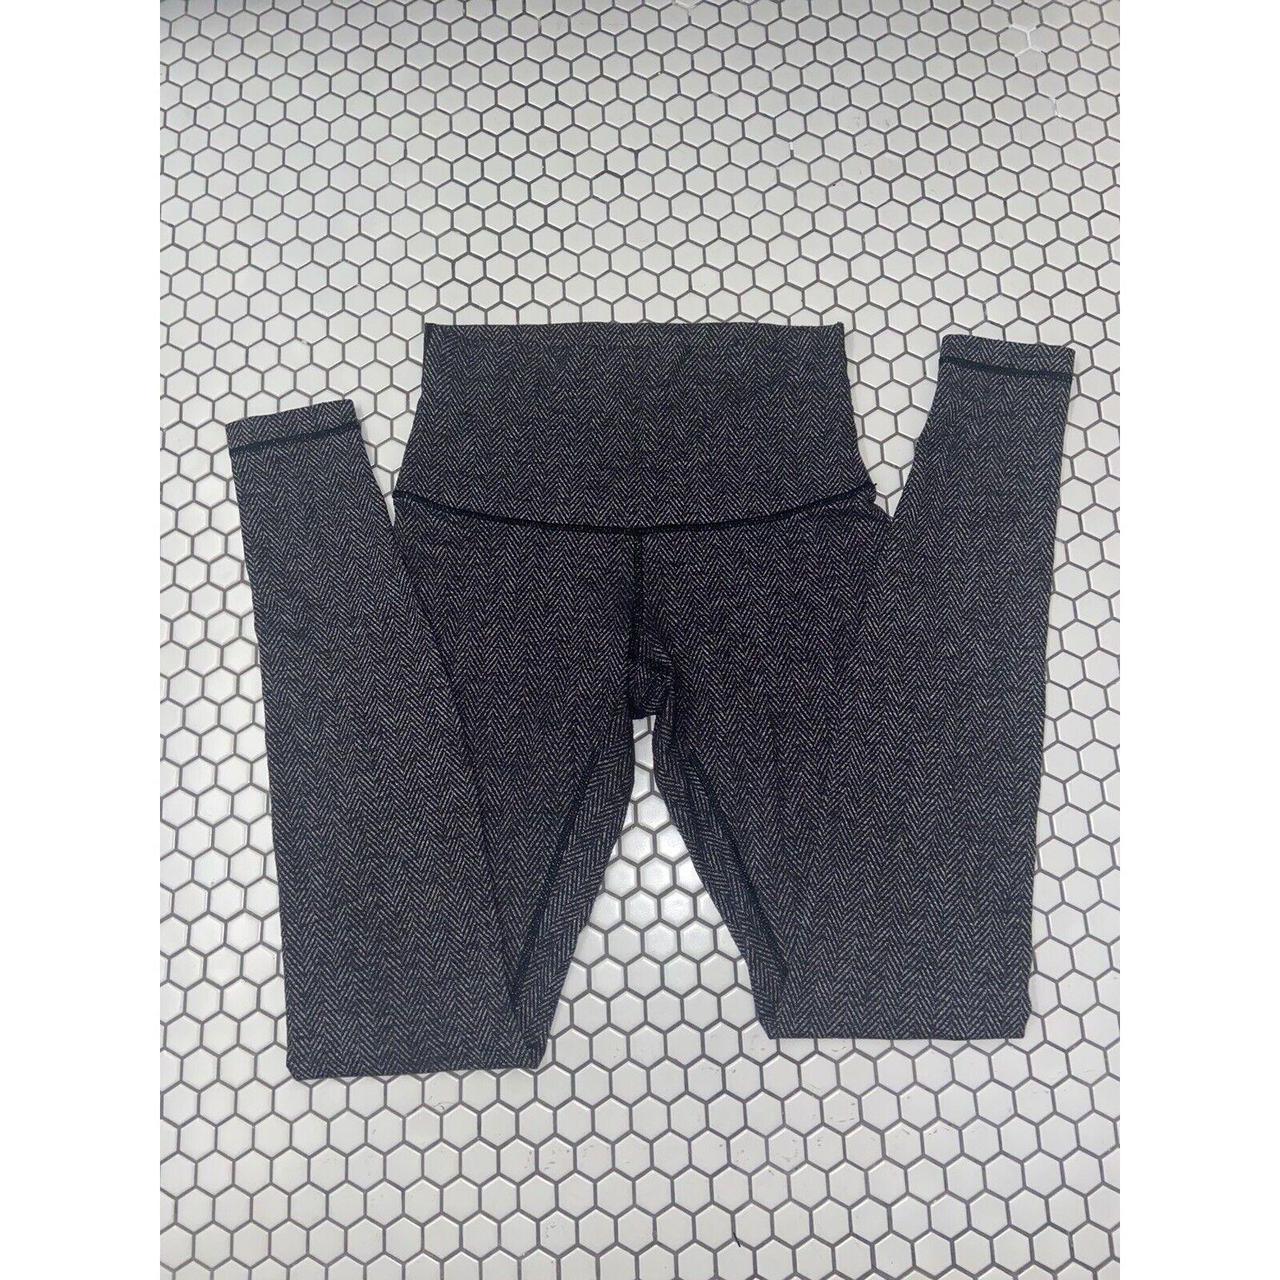 Elevate your activewear game with these Lululemon - Depop